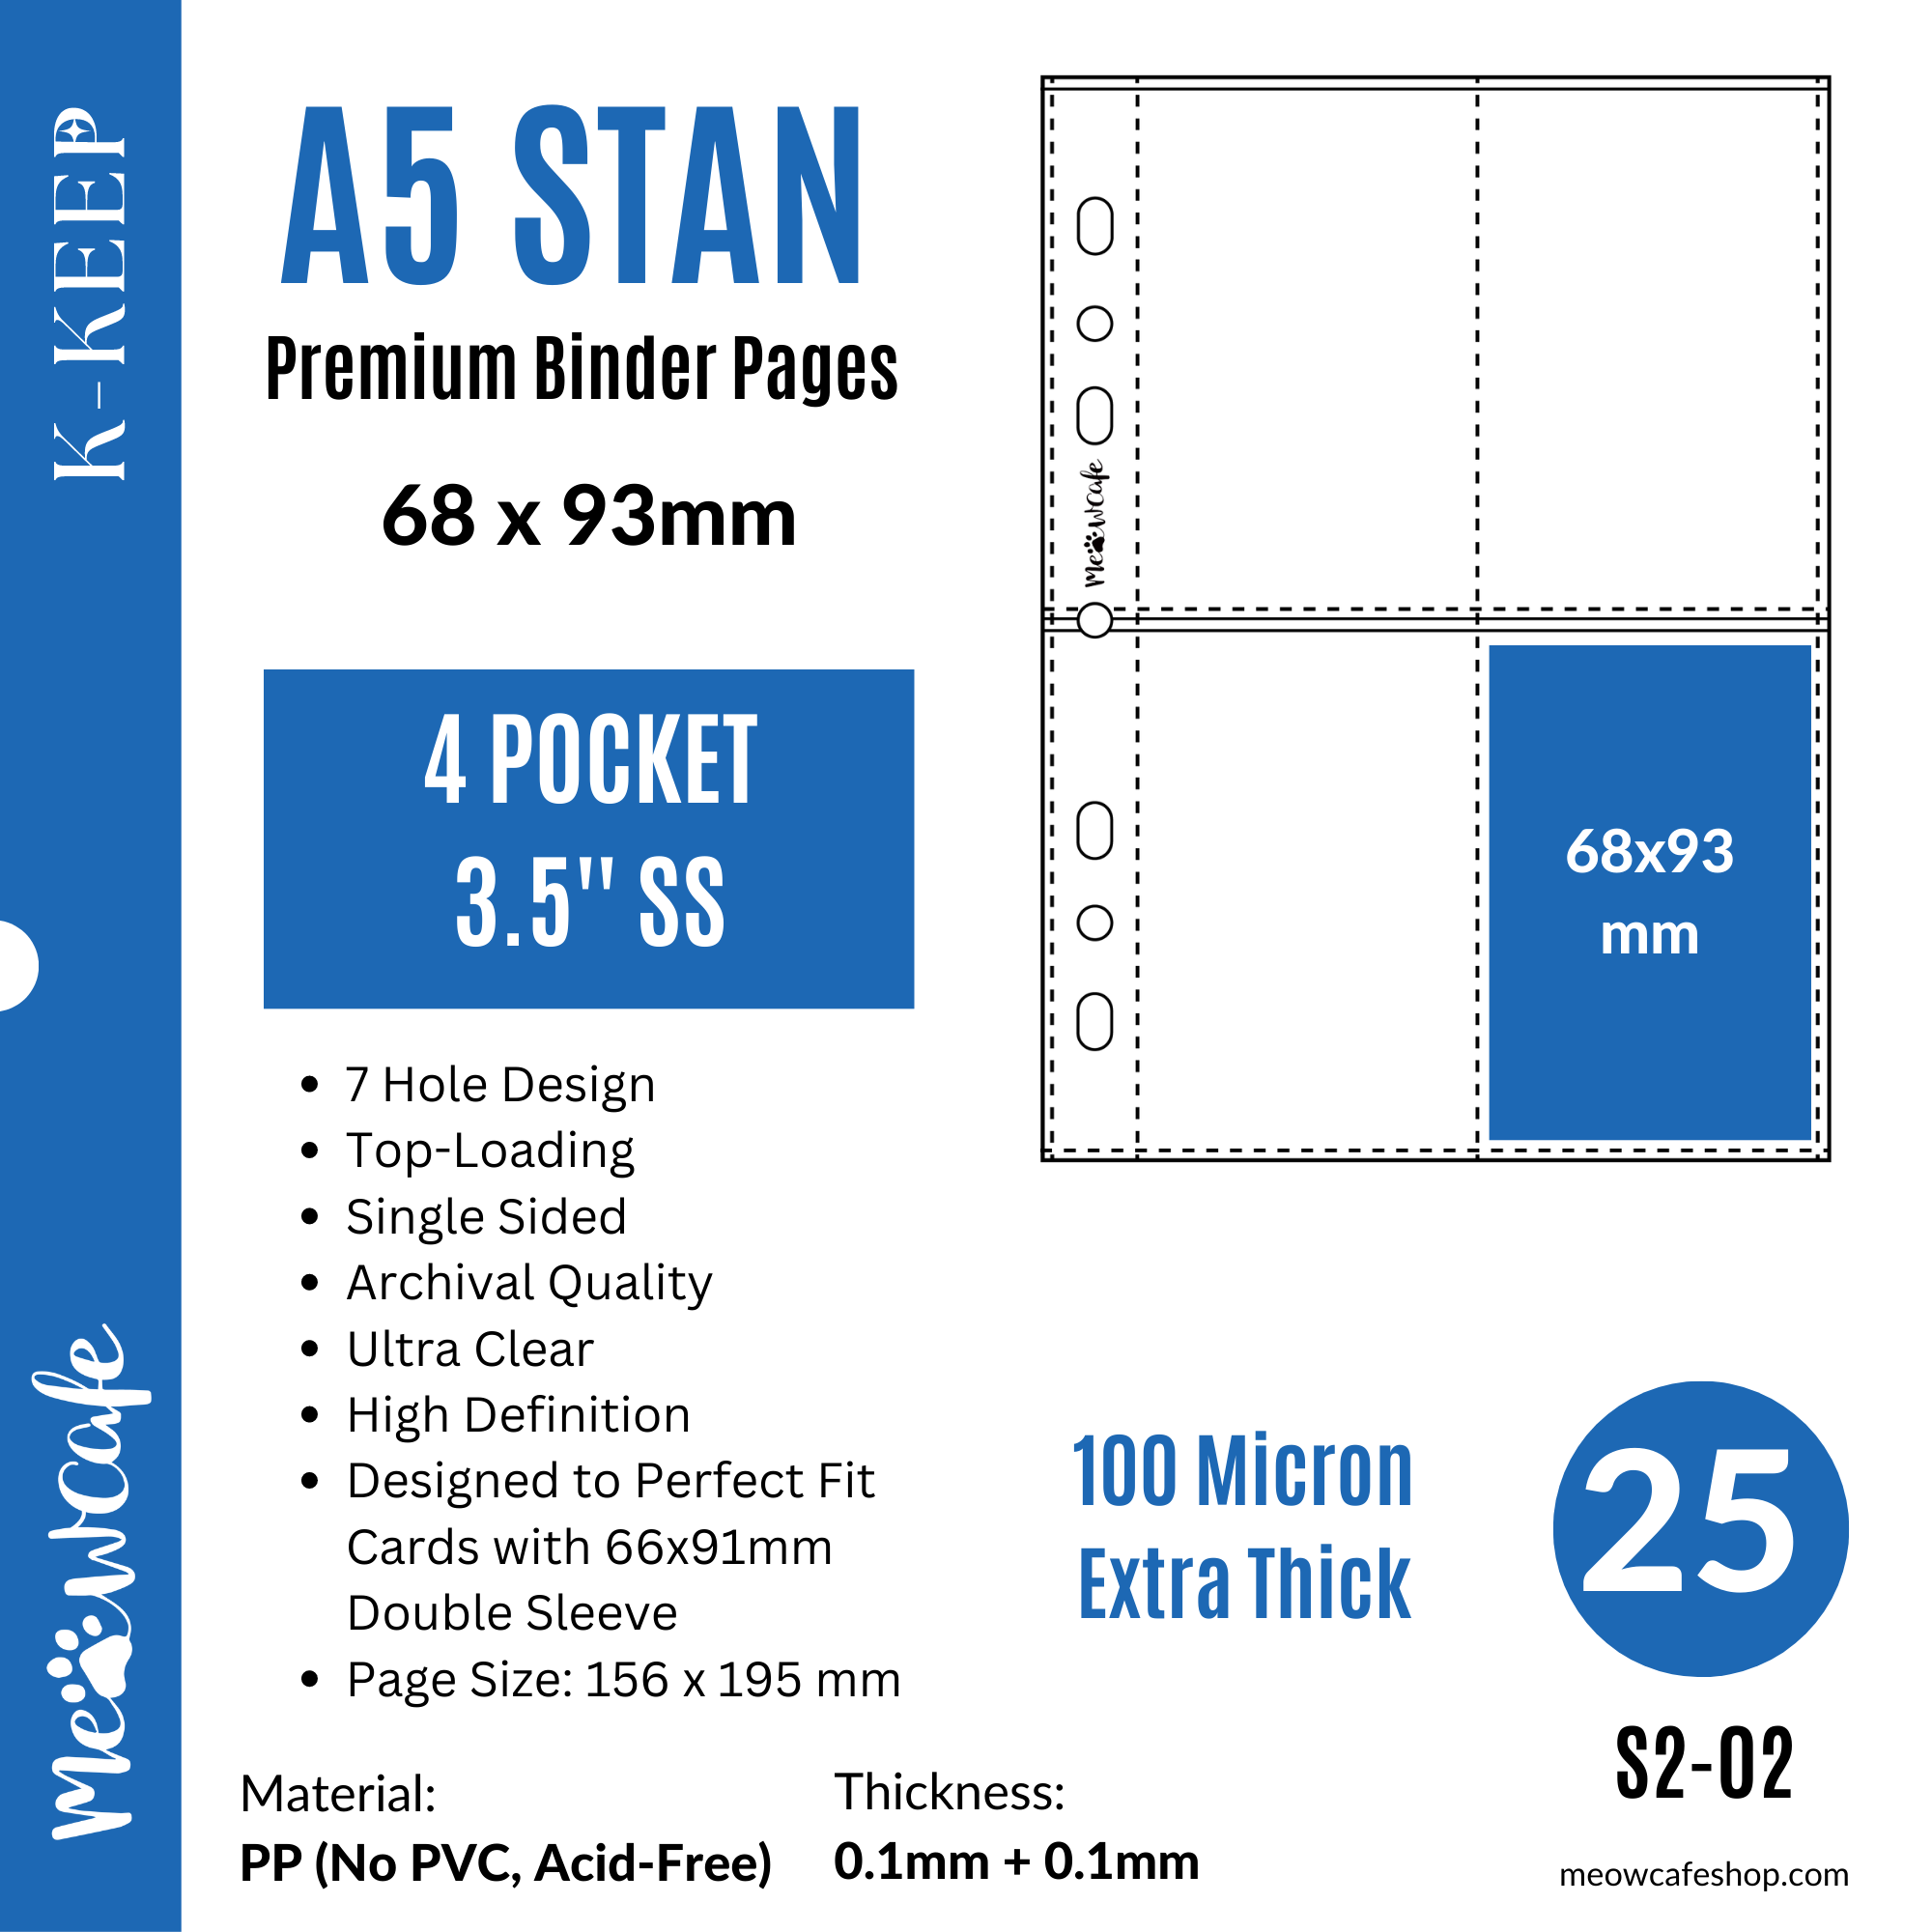 K-KEEP [A5 Standard] 4 Pockets 68x93mm- [For 66x91mm Sleeve] -7 Holes Premium Binder Pages, 100 Micron Thick, High Definition (Pack of 25) - S2-02